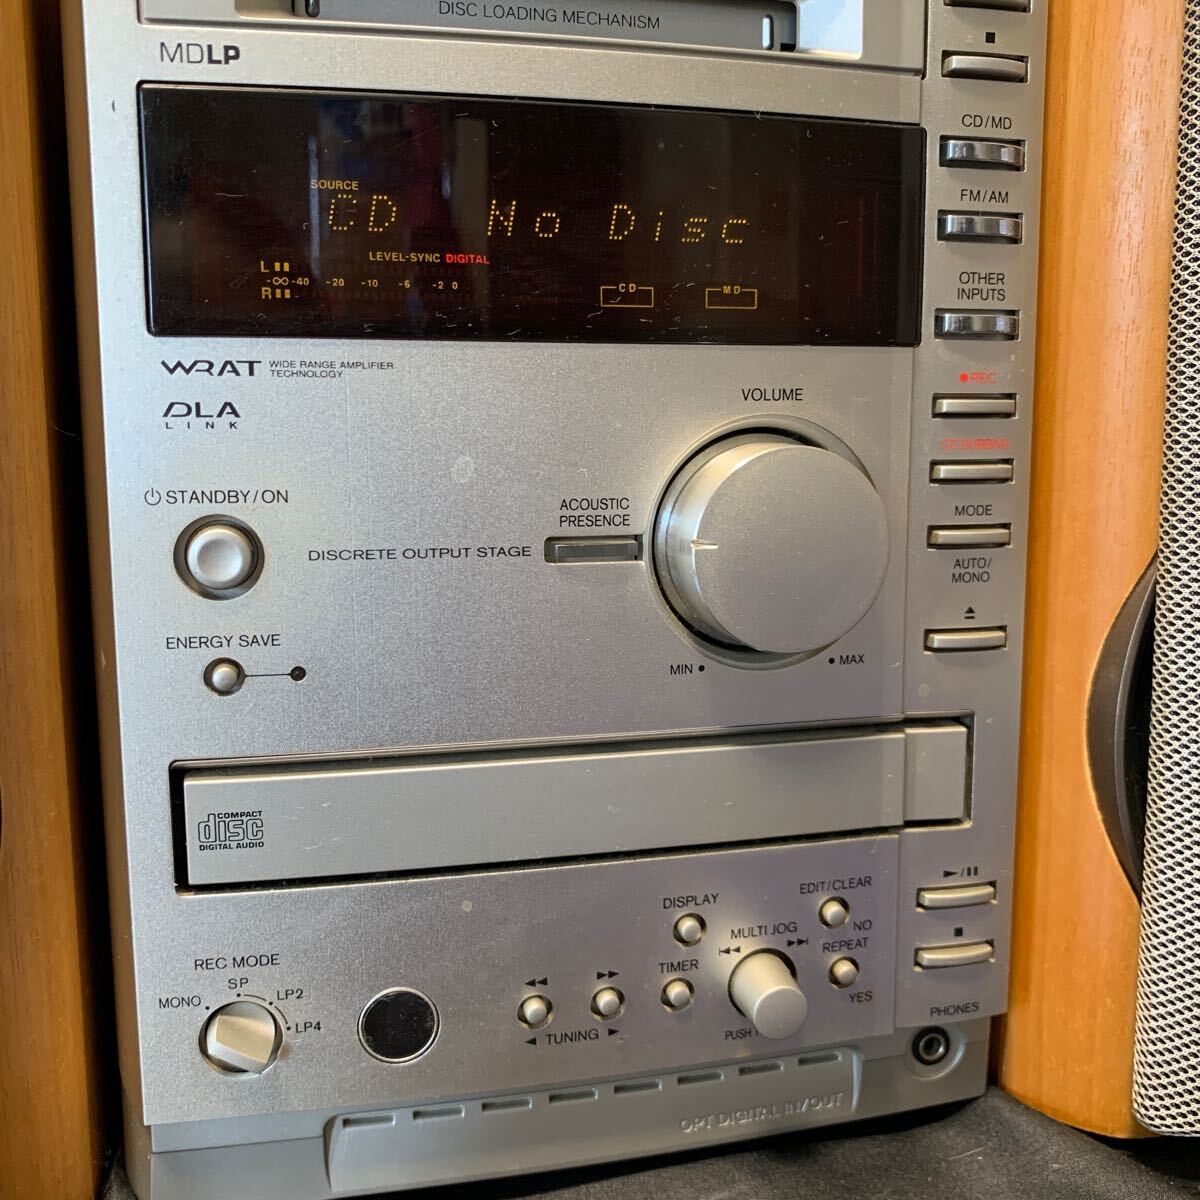 ONKYO Onkyo system player FR-155 CD MD component stereo electrification has confirmed audio equipment sound equipment D-02EX pair speaker 